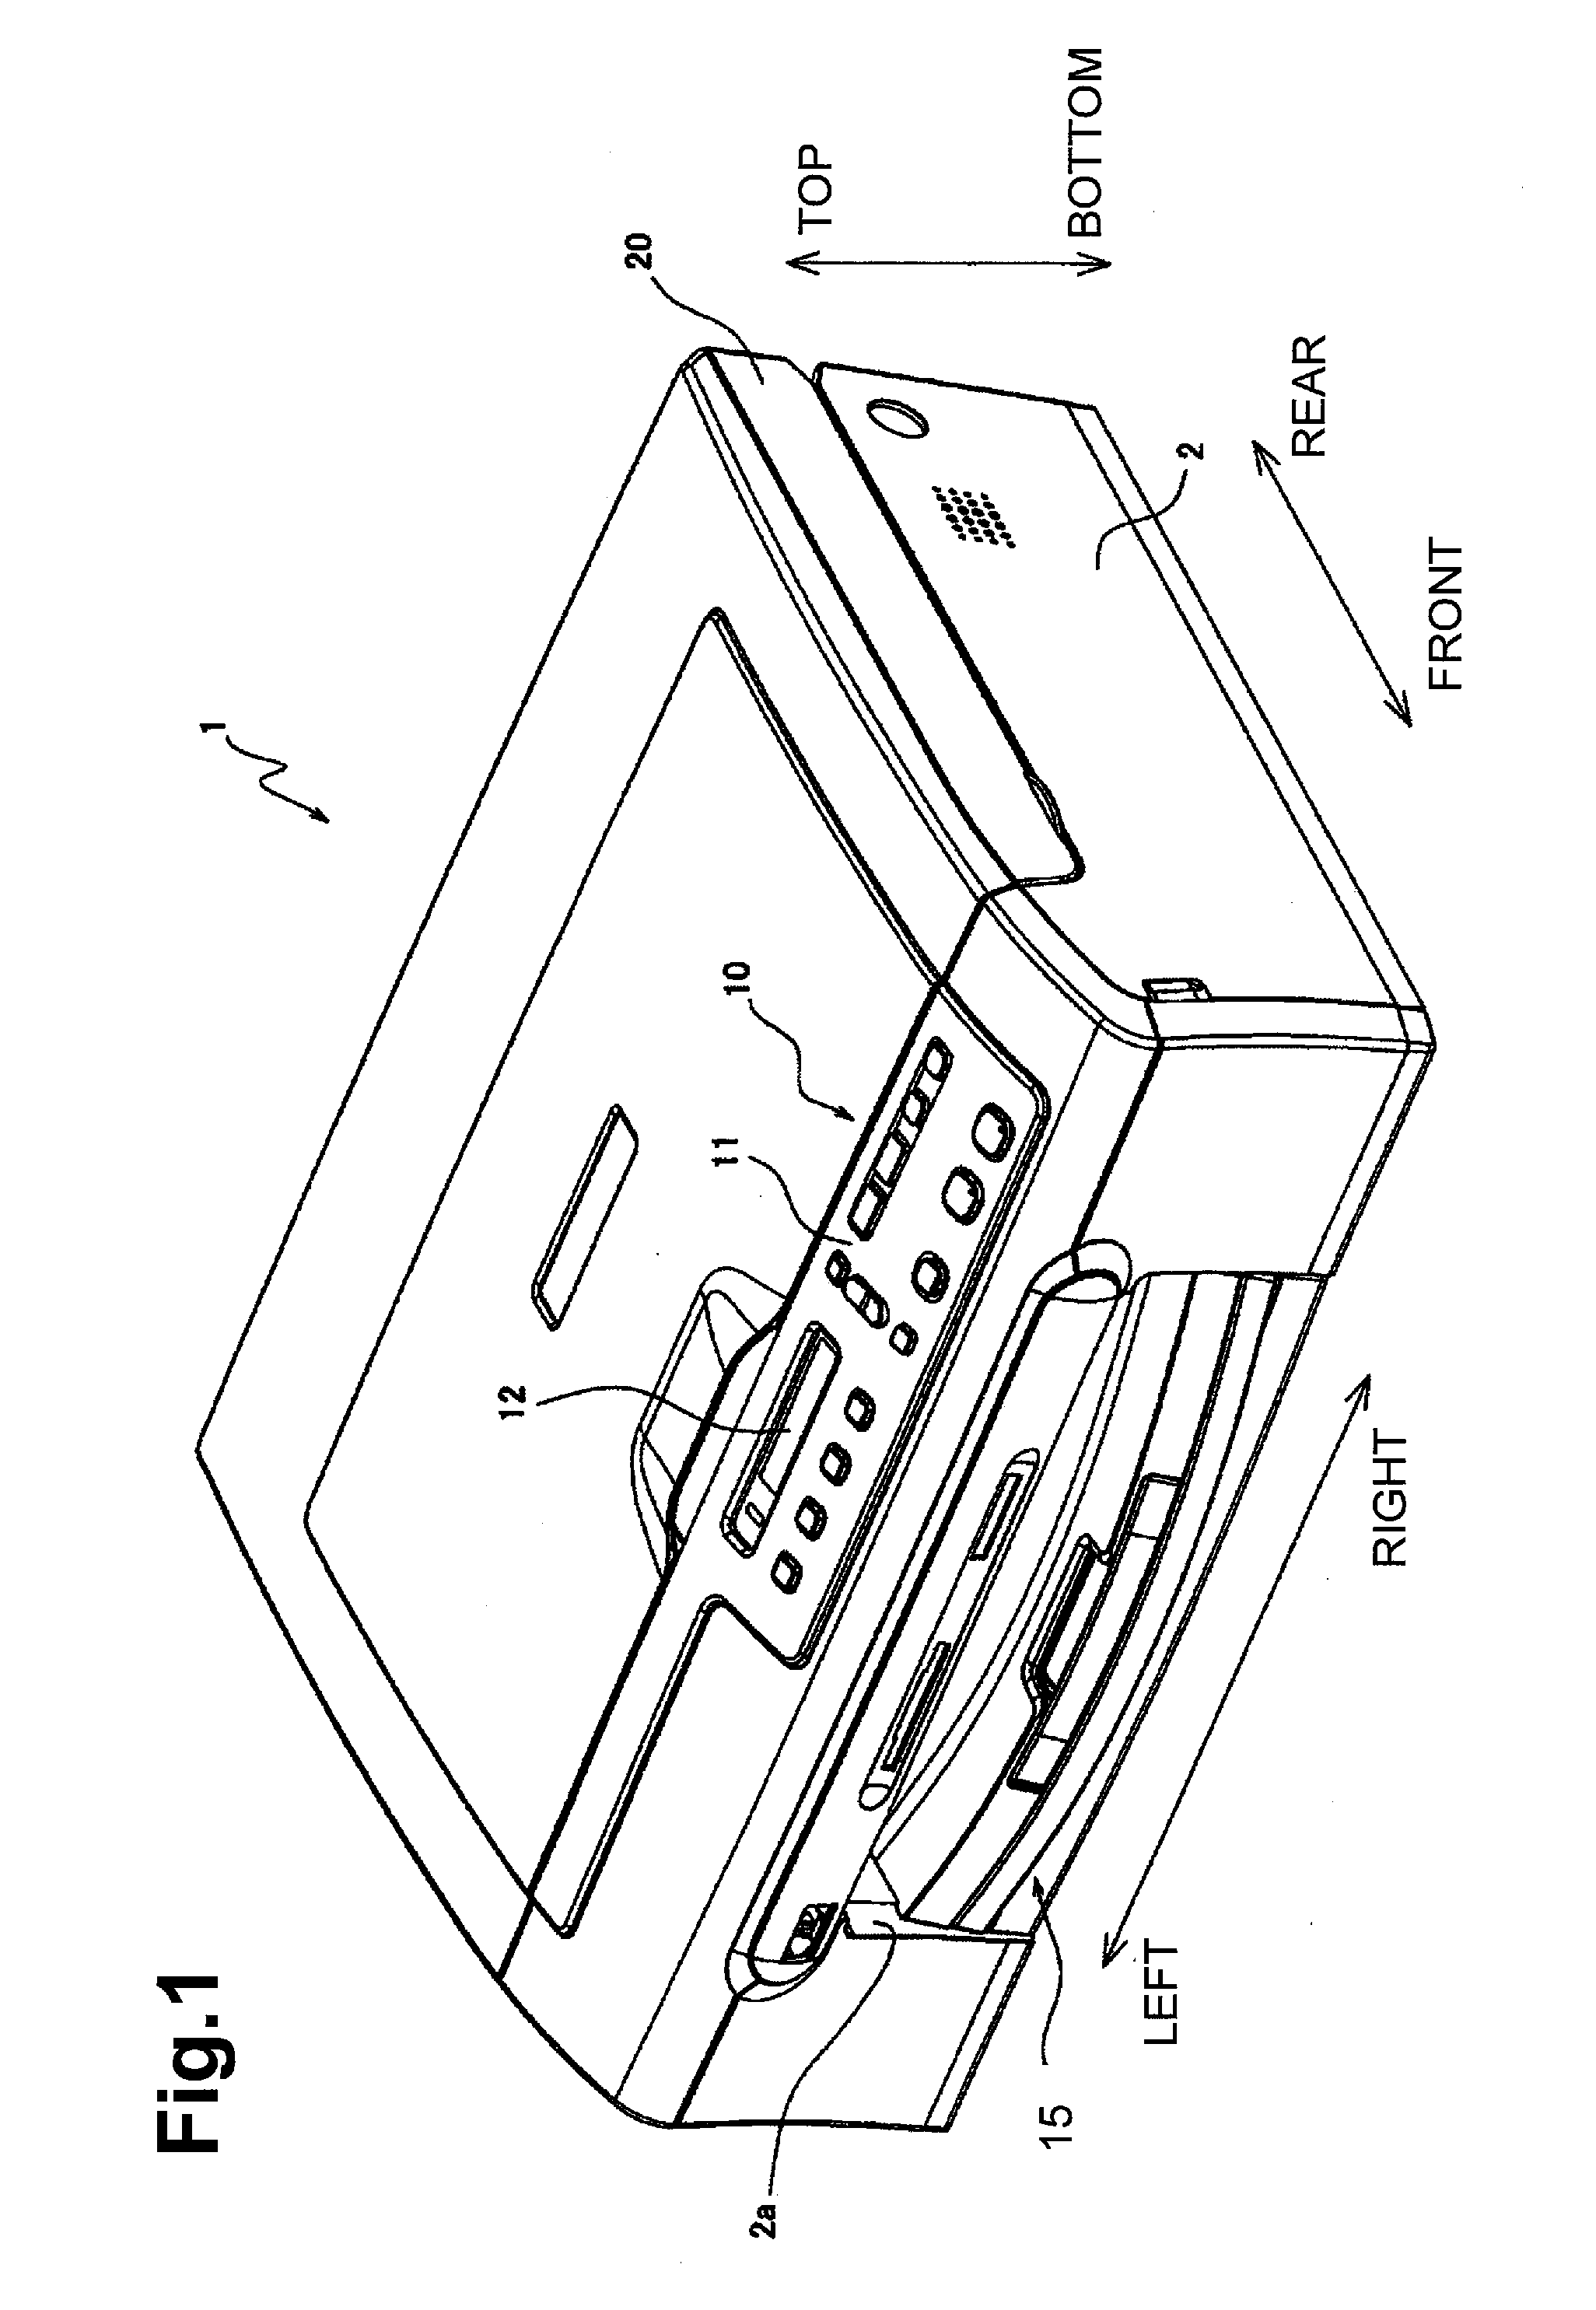 Supply Tray And Image Forming Apparatus For Use Therewith